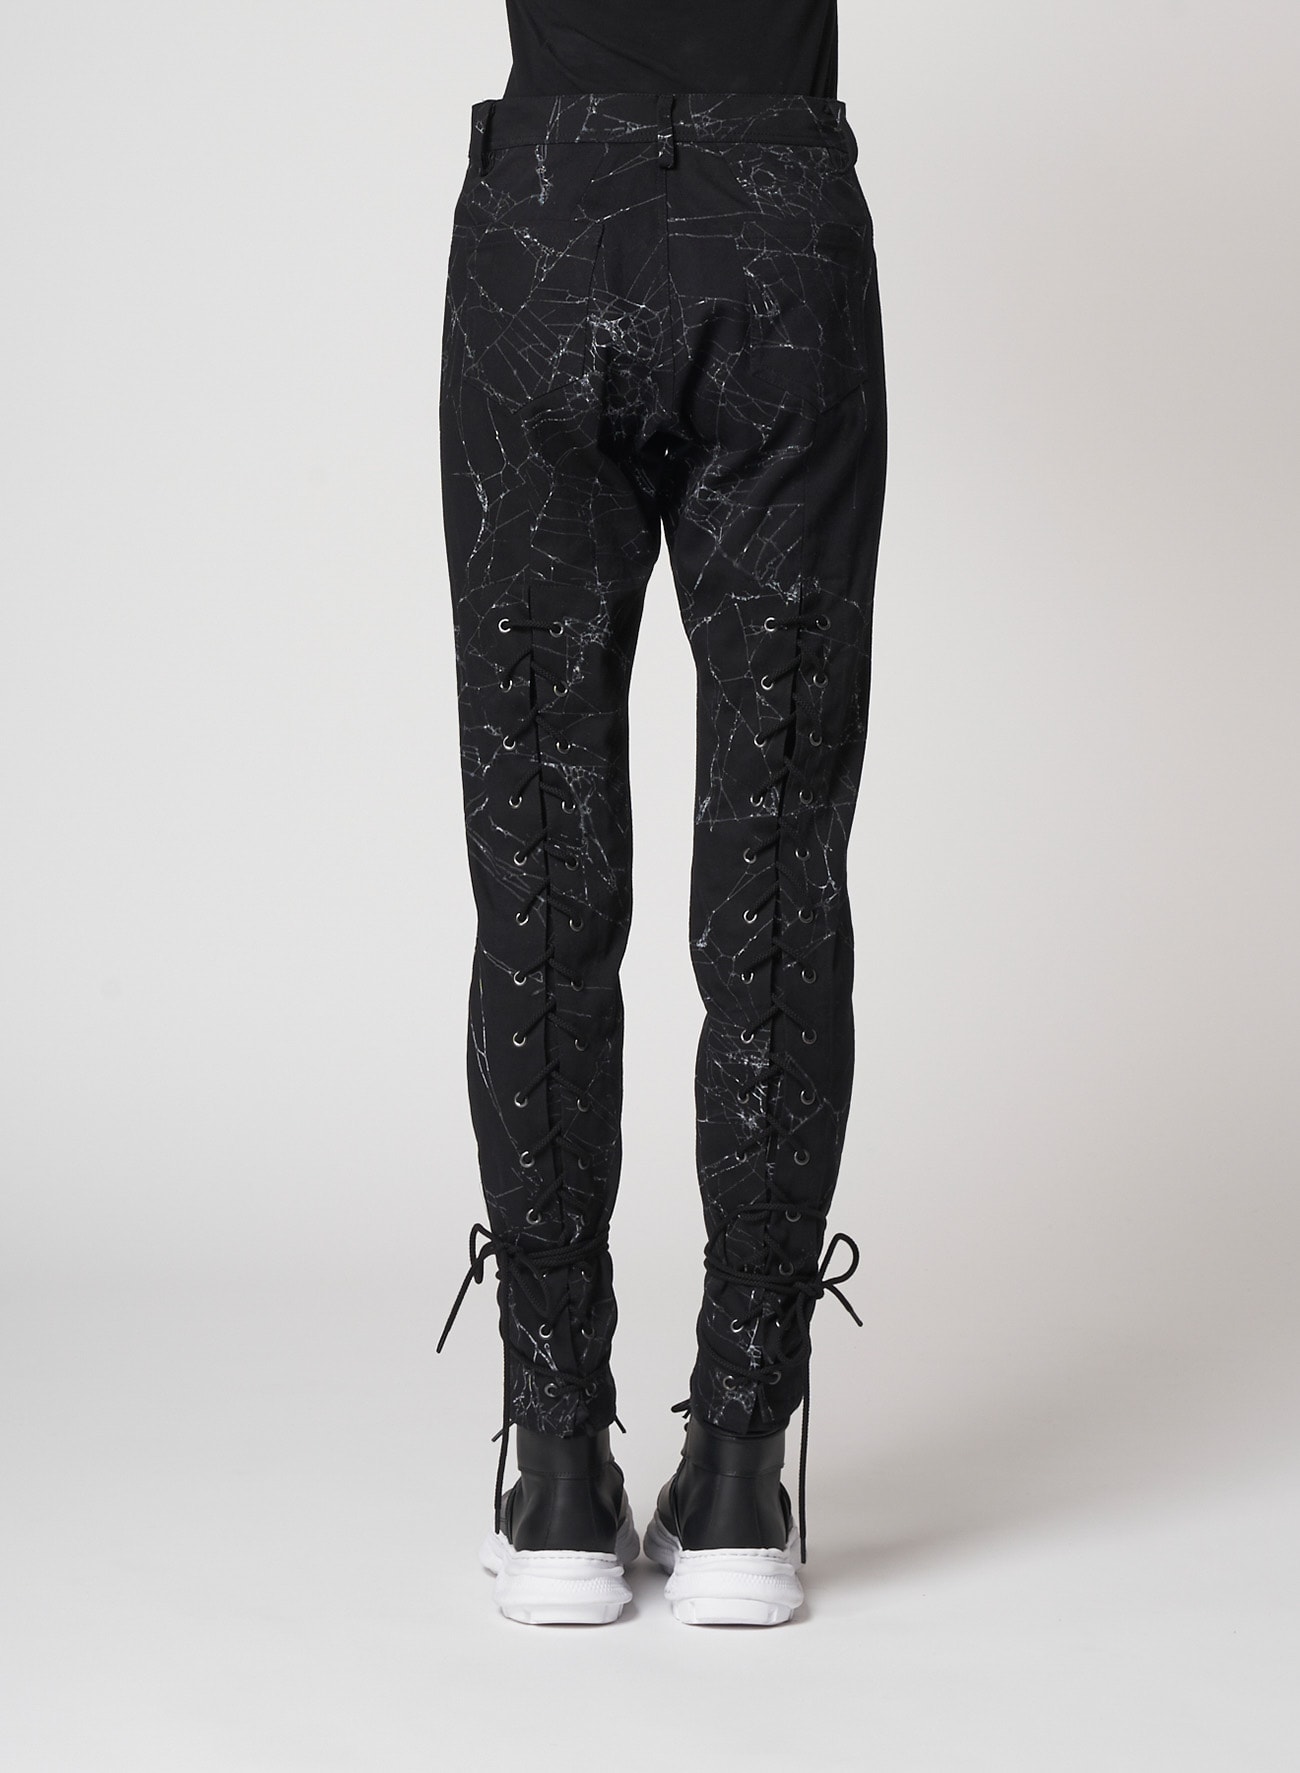 Spider Drill Back Lace Up Pants